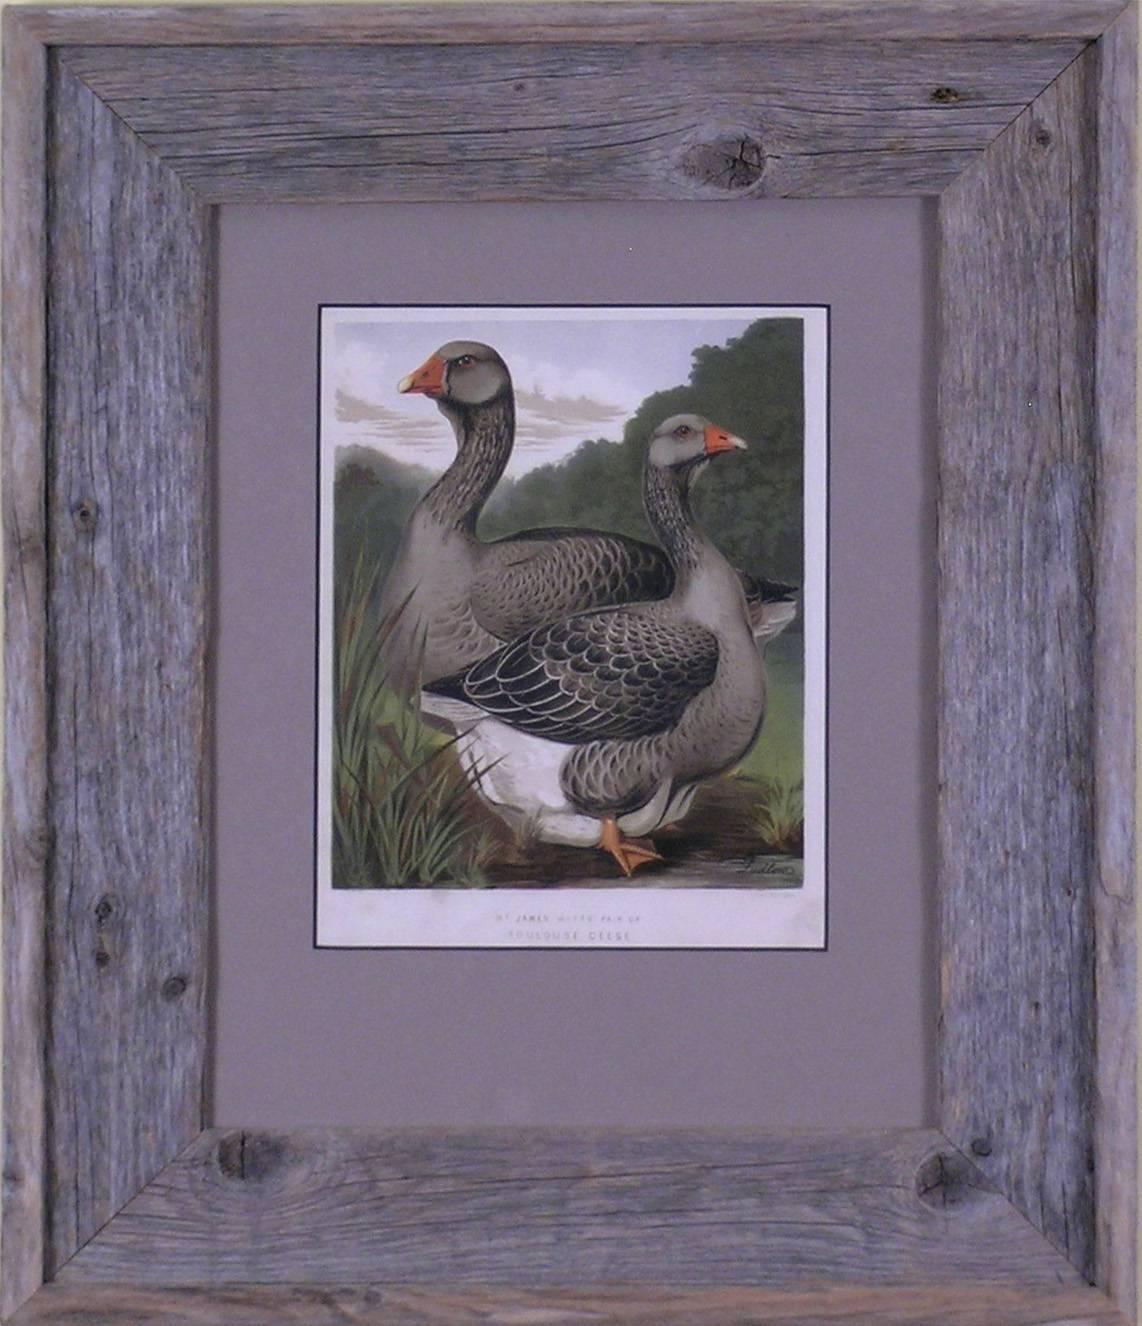 Toulouse Geese - Print by J.W. Ludlow